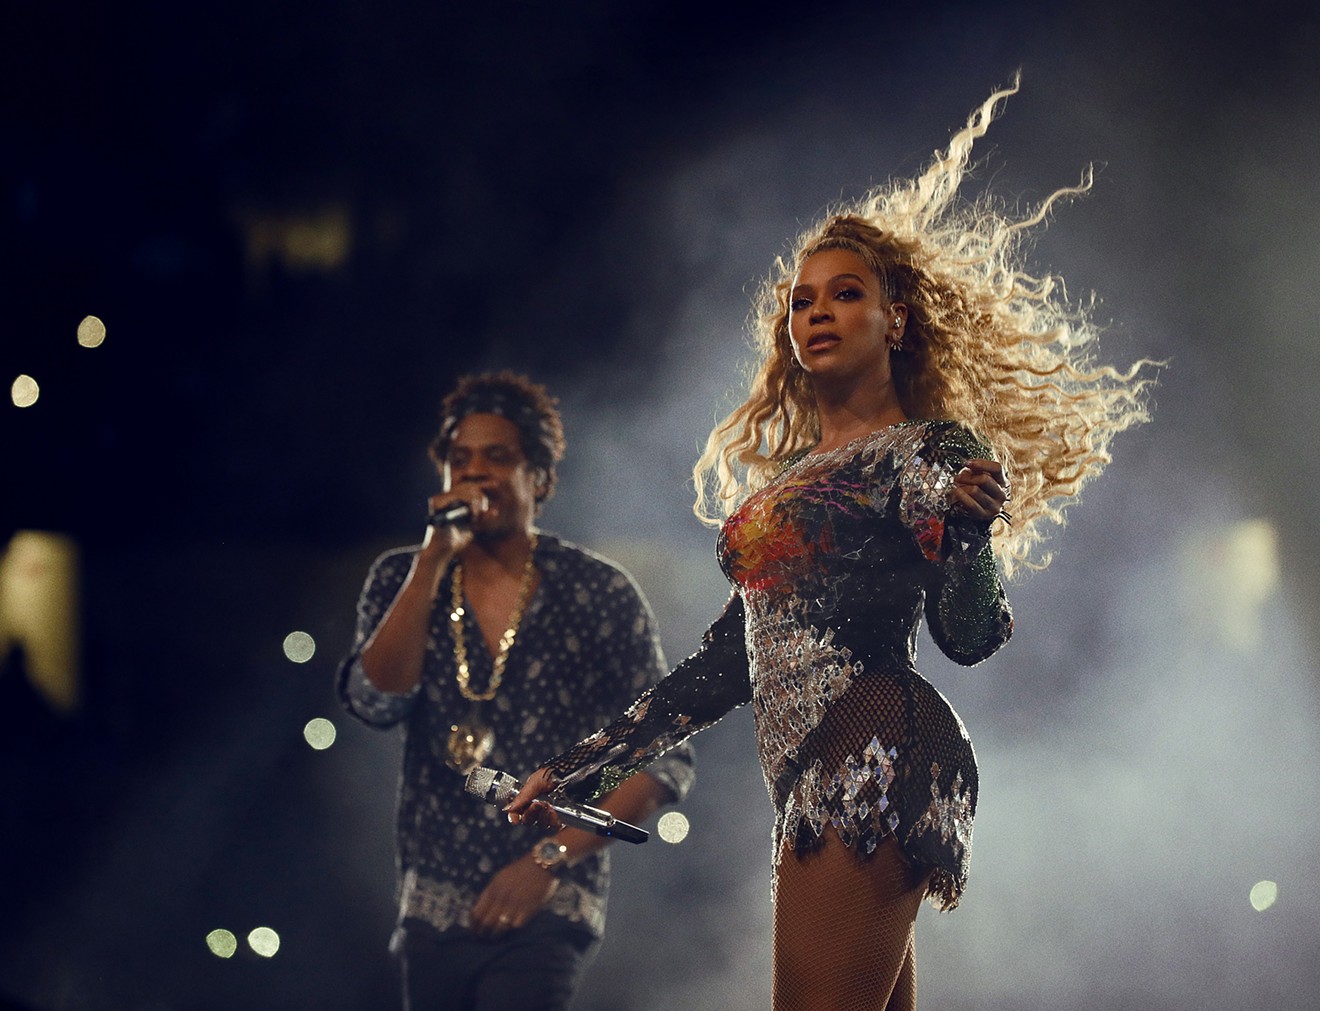 Beyoncé and Jay-Z perform at Ford Field on August 13, 2018 in Detroit, Michigan.